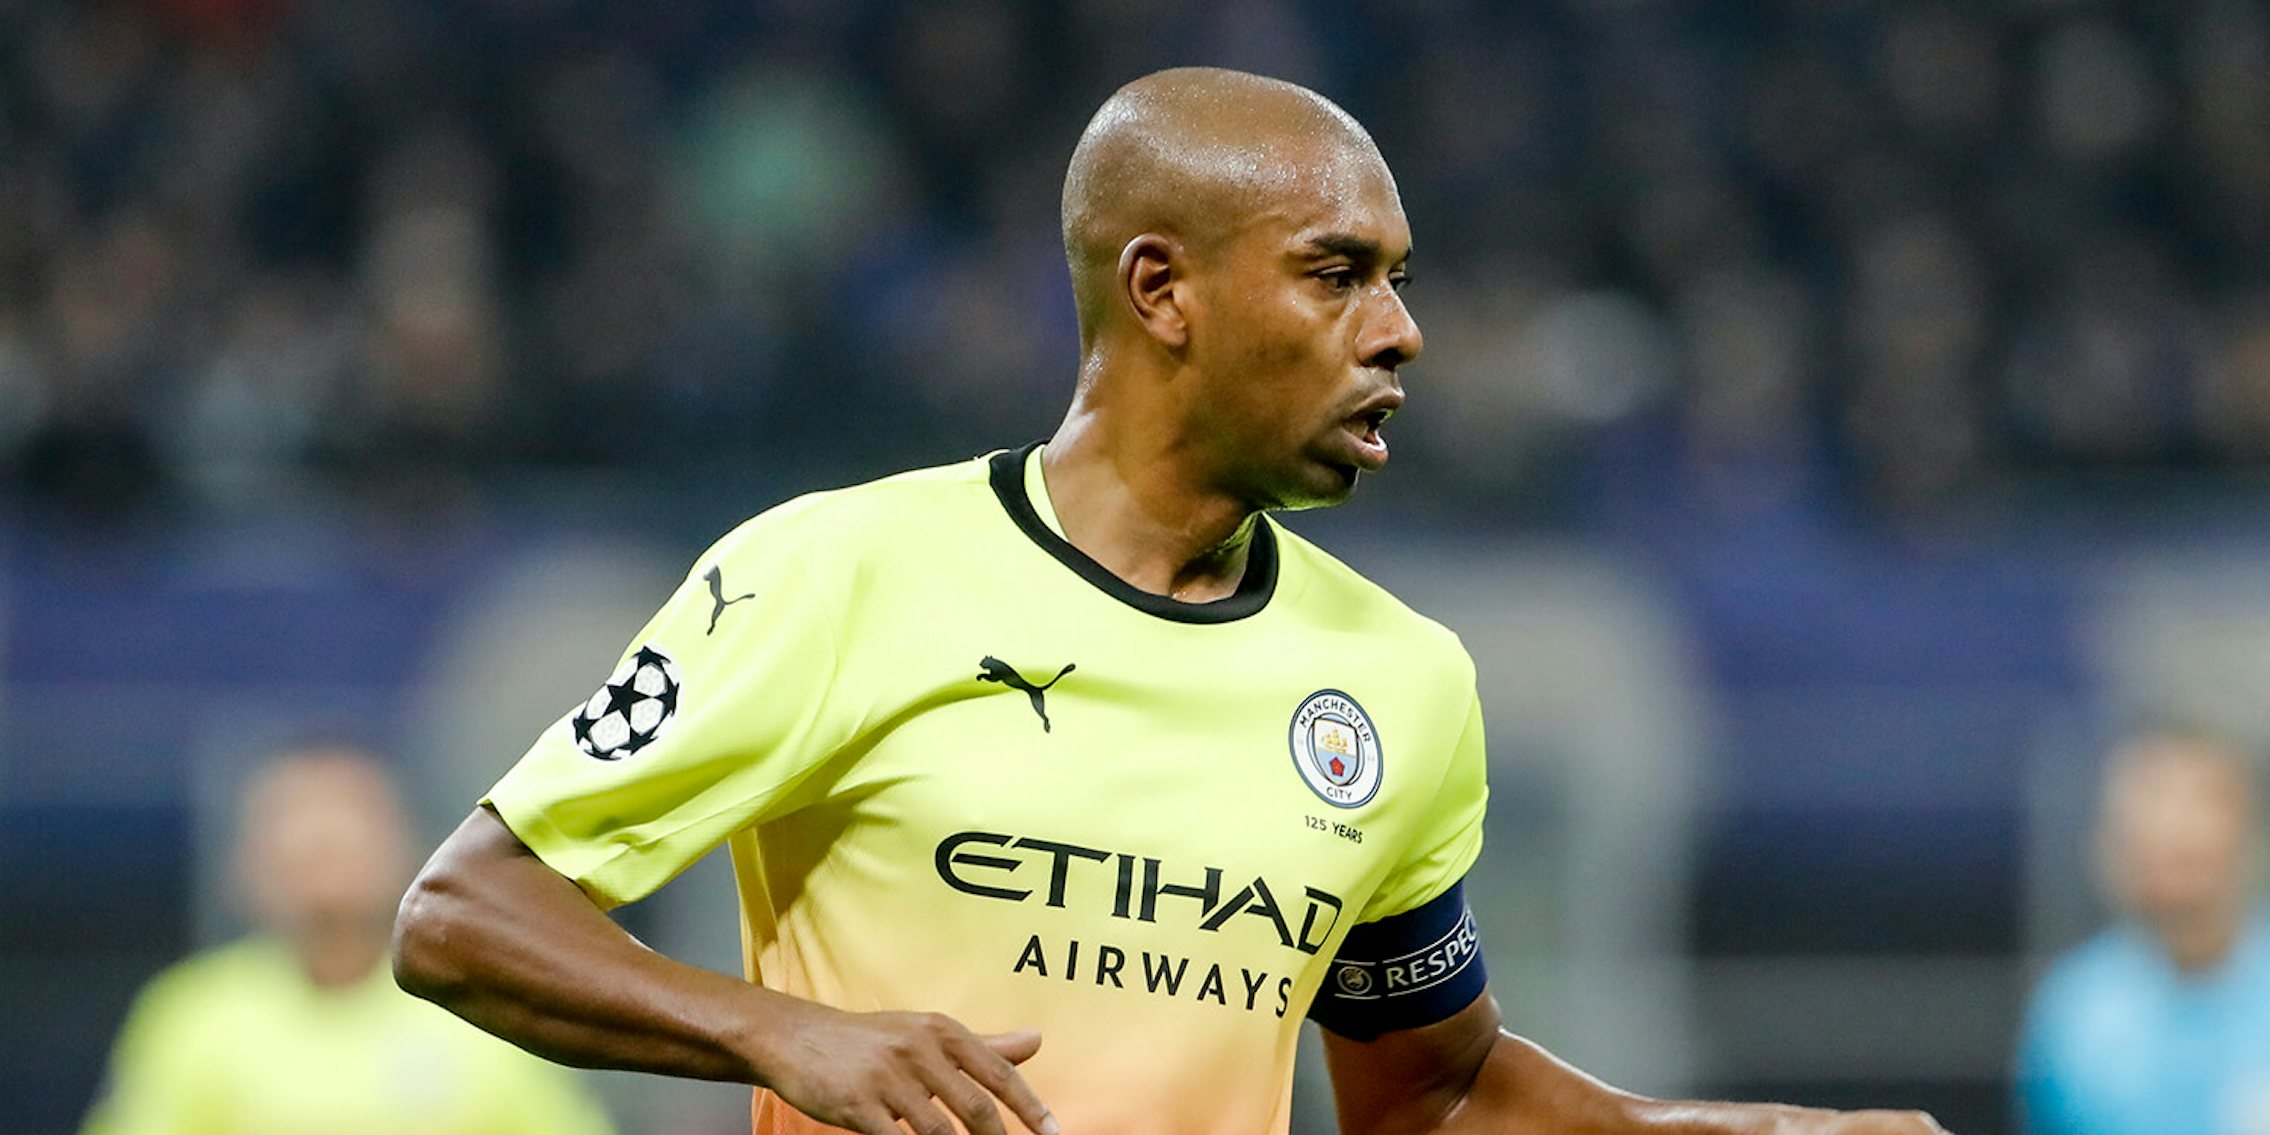 Fernandinho of Manchester City in live game action